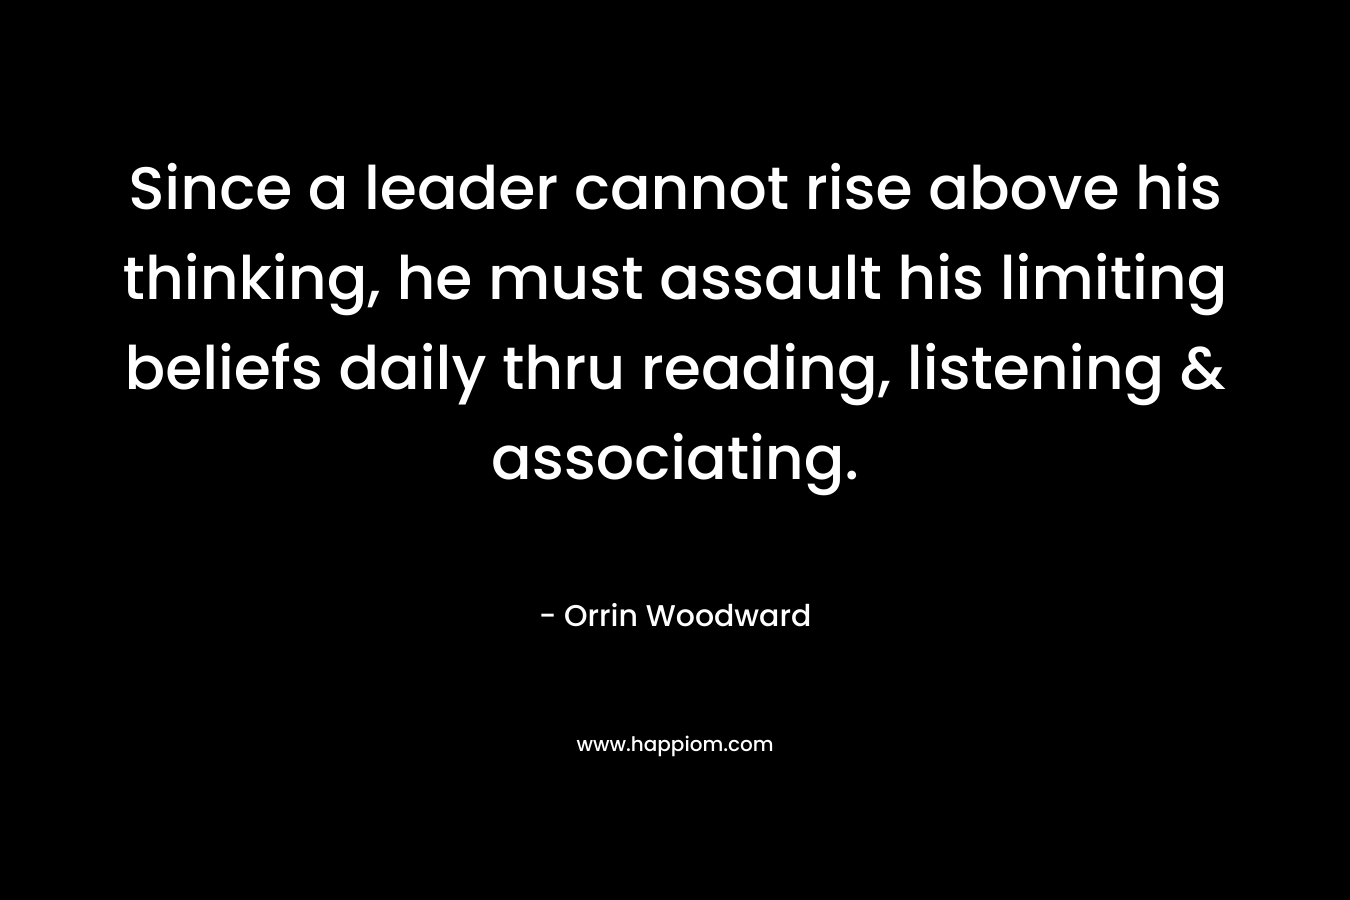 Since a leader cannot rise above his thinking, he must assault his limiting beliefs daily thru reading, listening & associating.